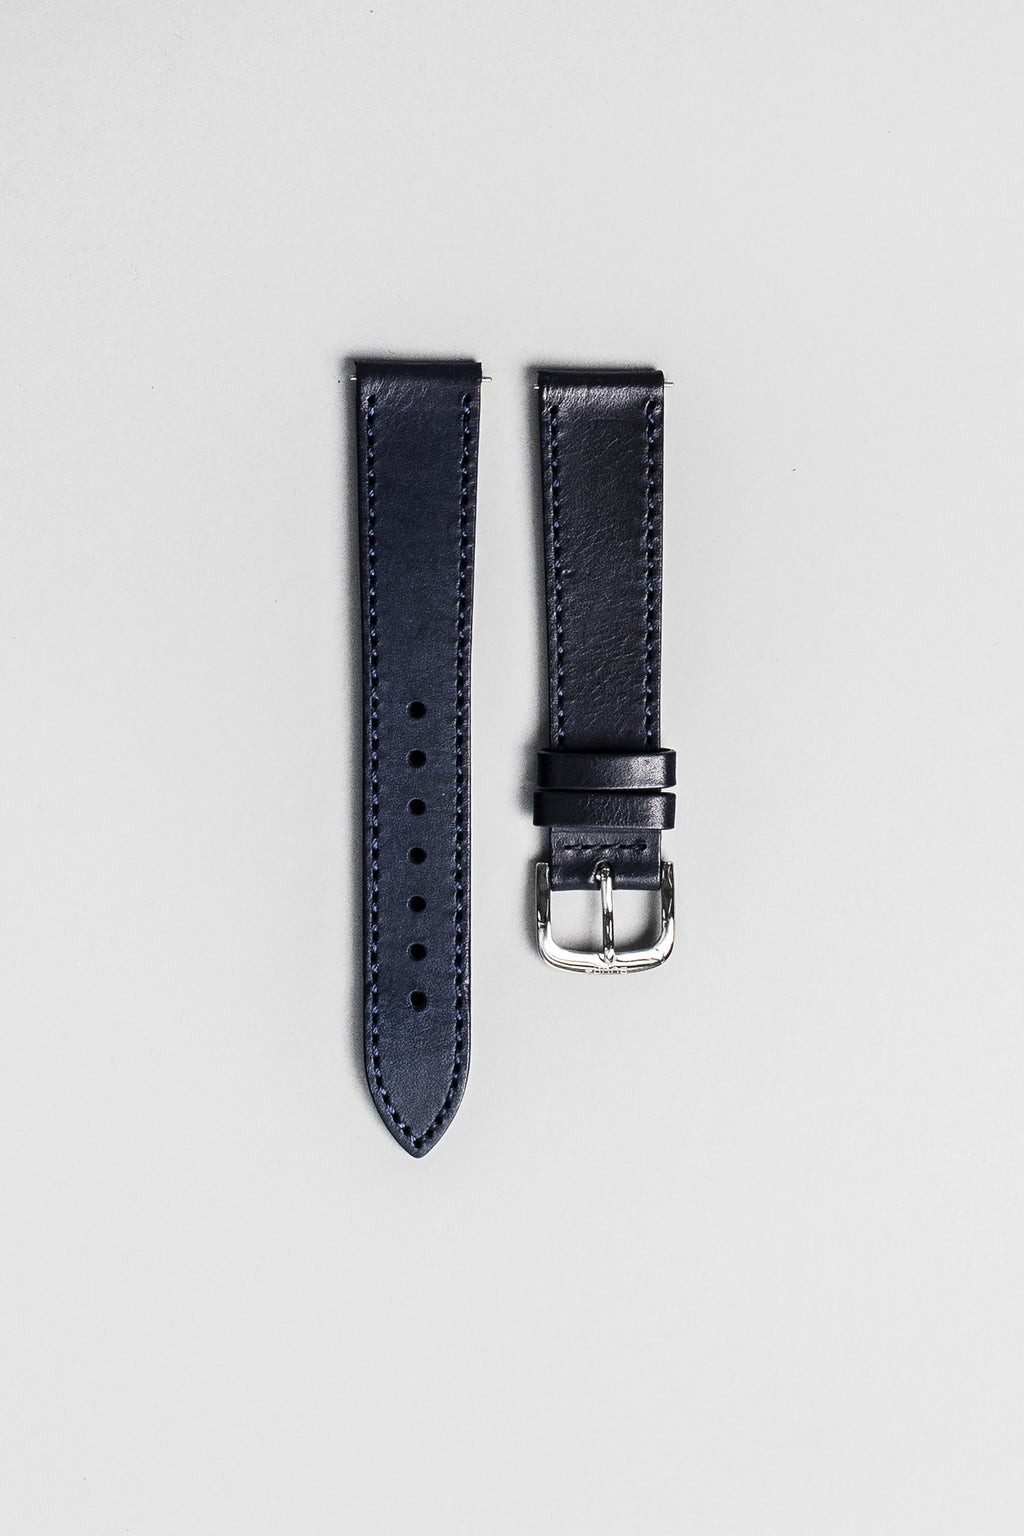 The blue veg tan Italian leather strap with polished buckle. 18mm